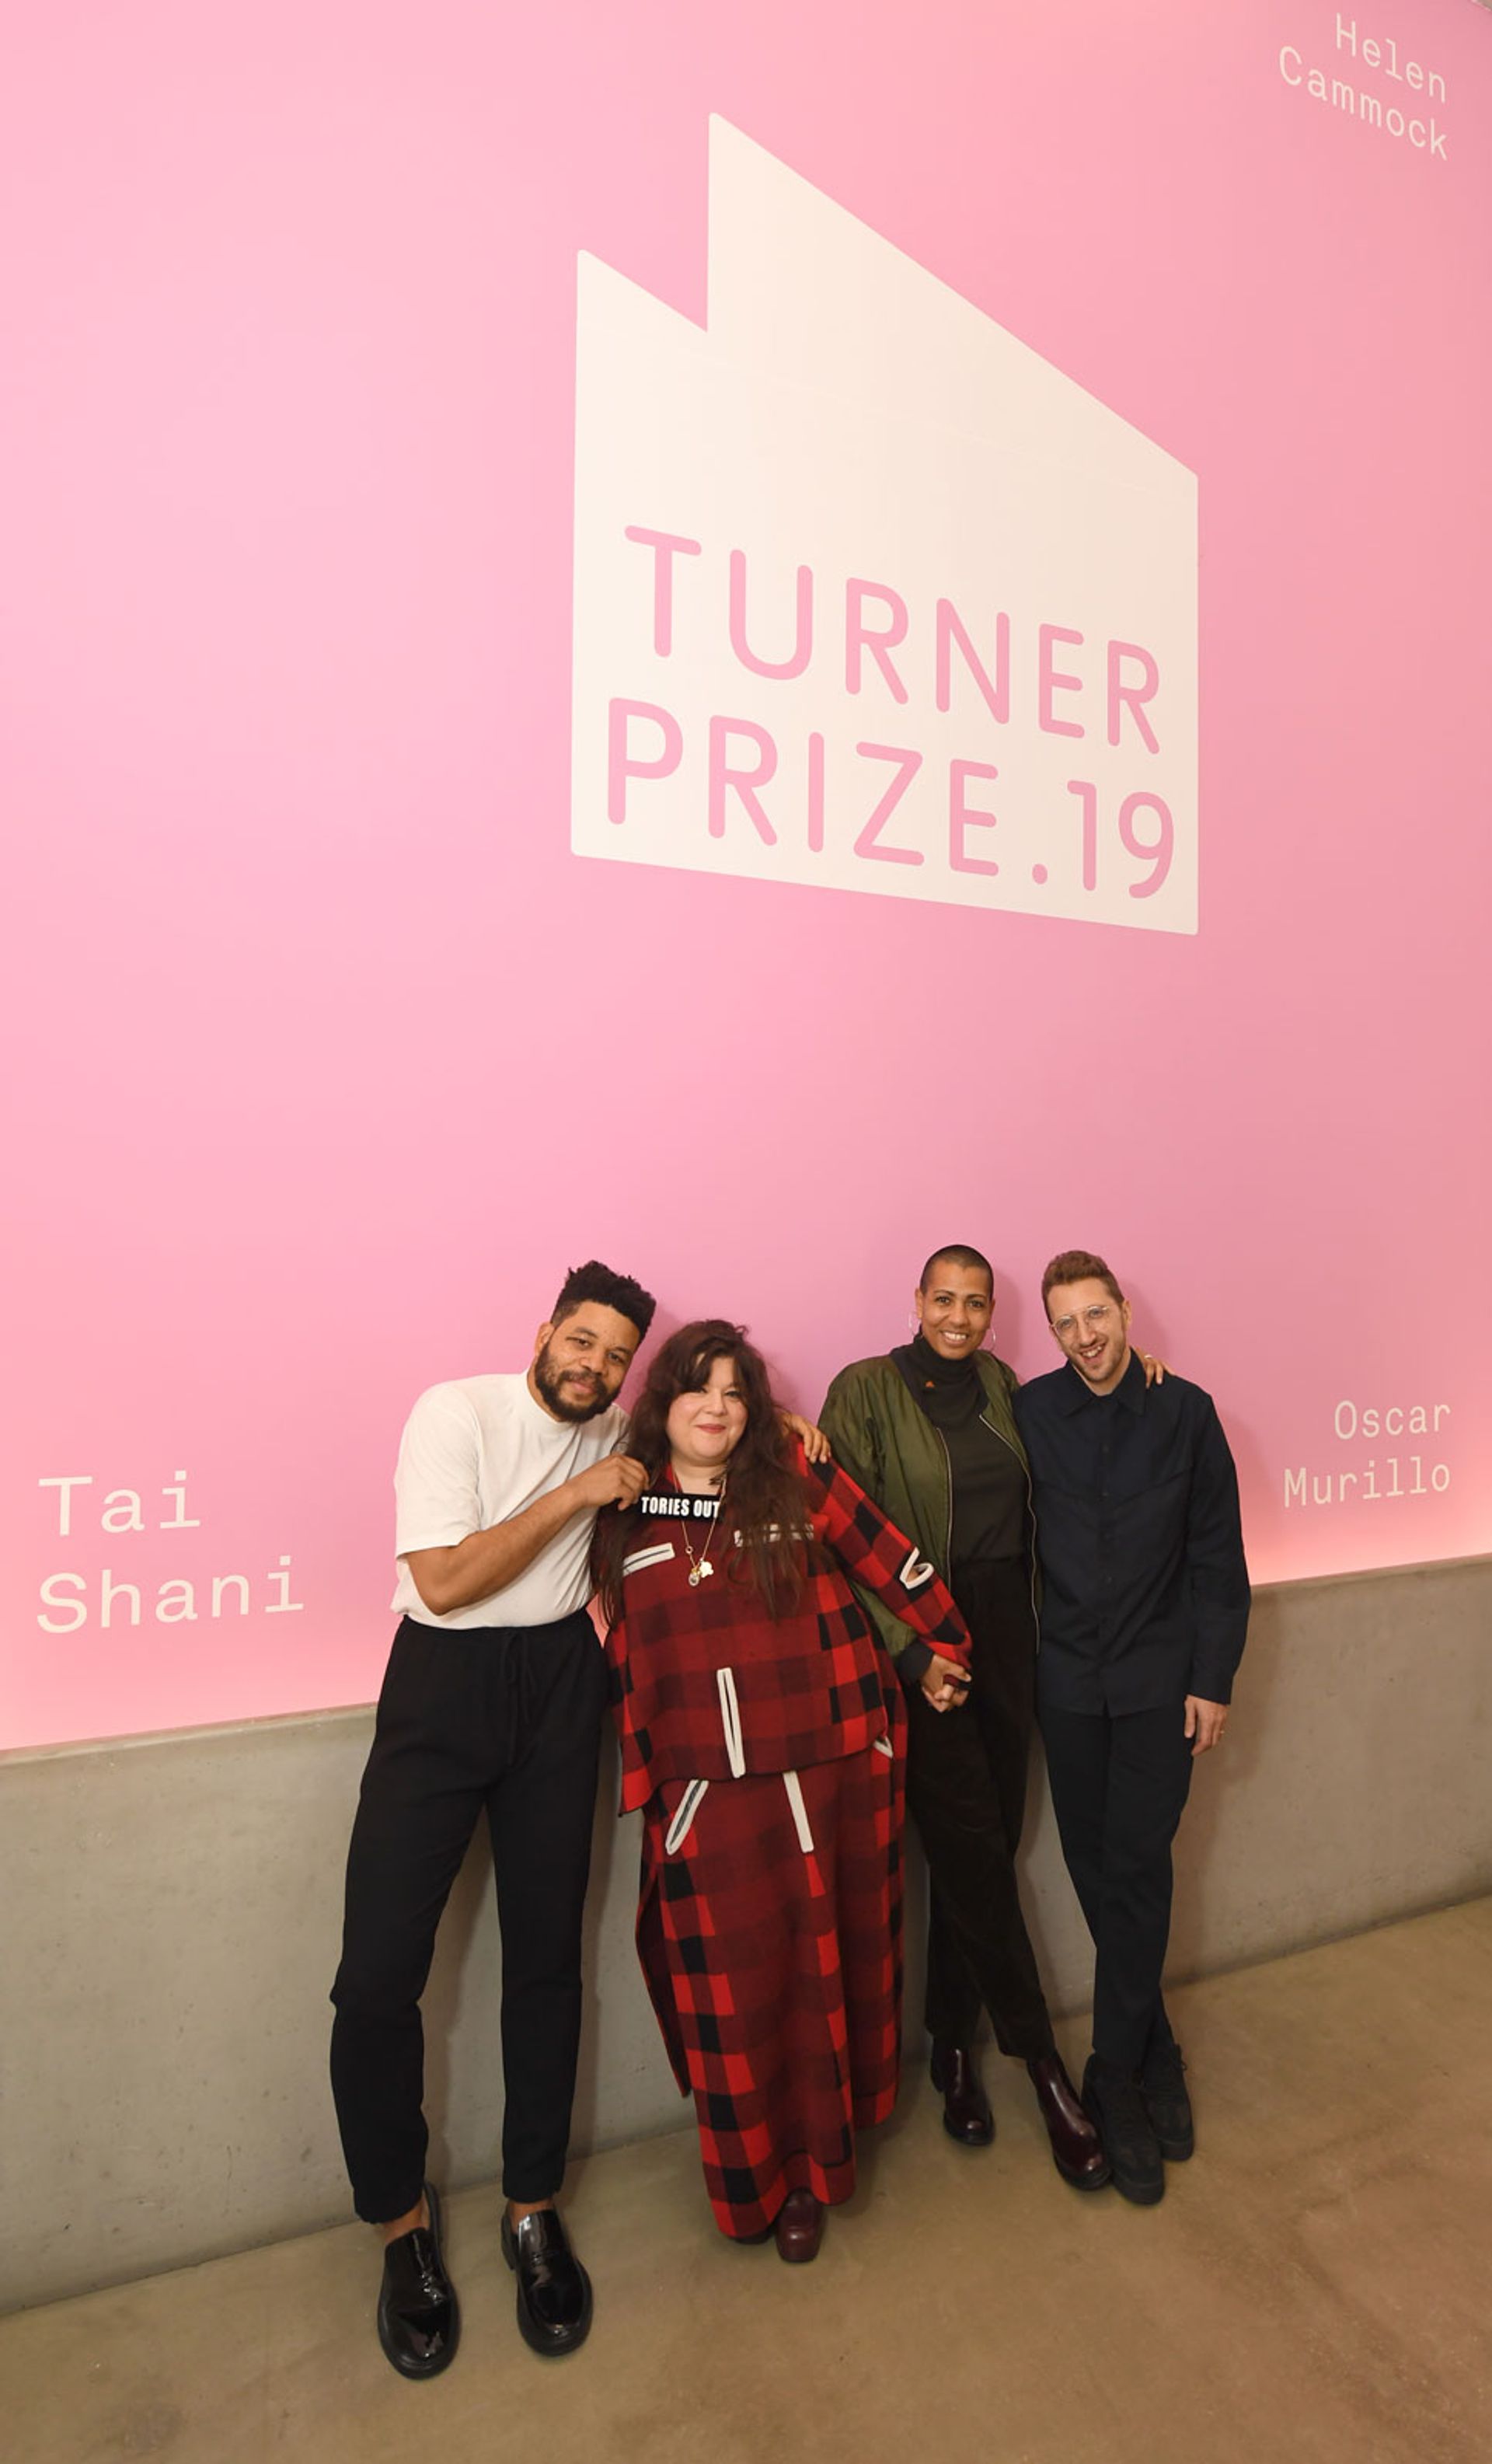 Oscar Murillo, Tai Shani, Helen Cammock and Lawrence Abu Hamdan collectively won the Turner Prize Photo: © Stuart Wilson/Getty Images for Turner Contemporary